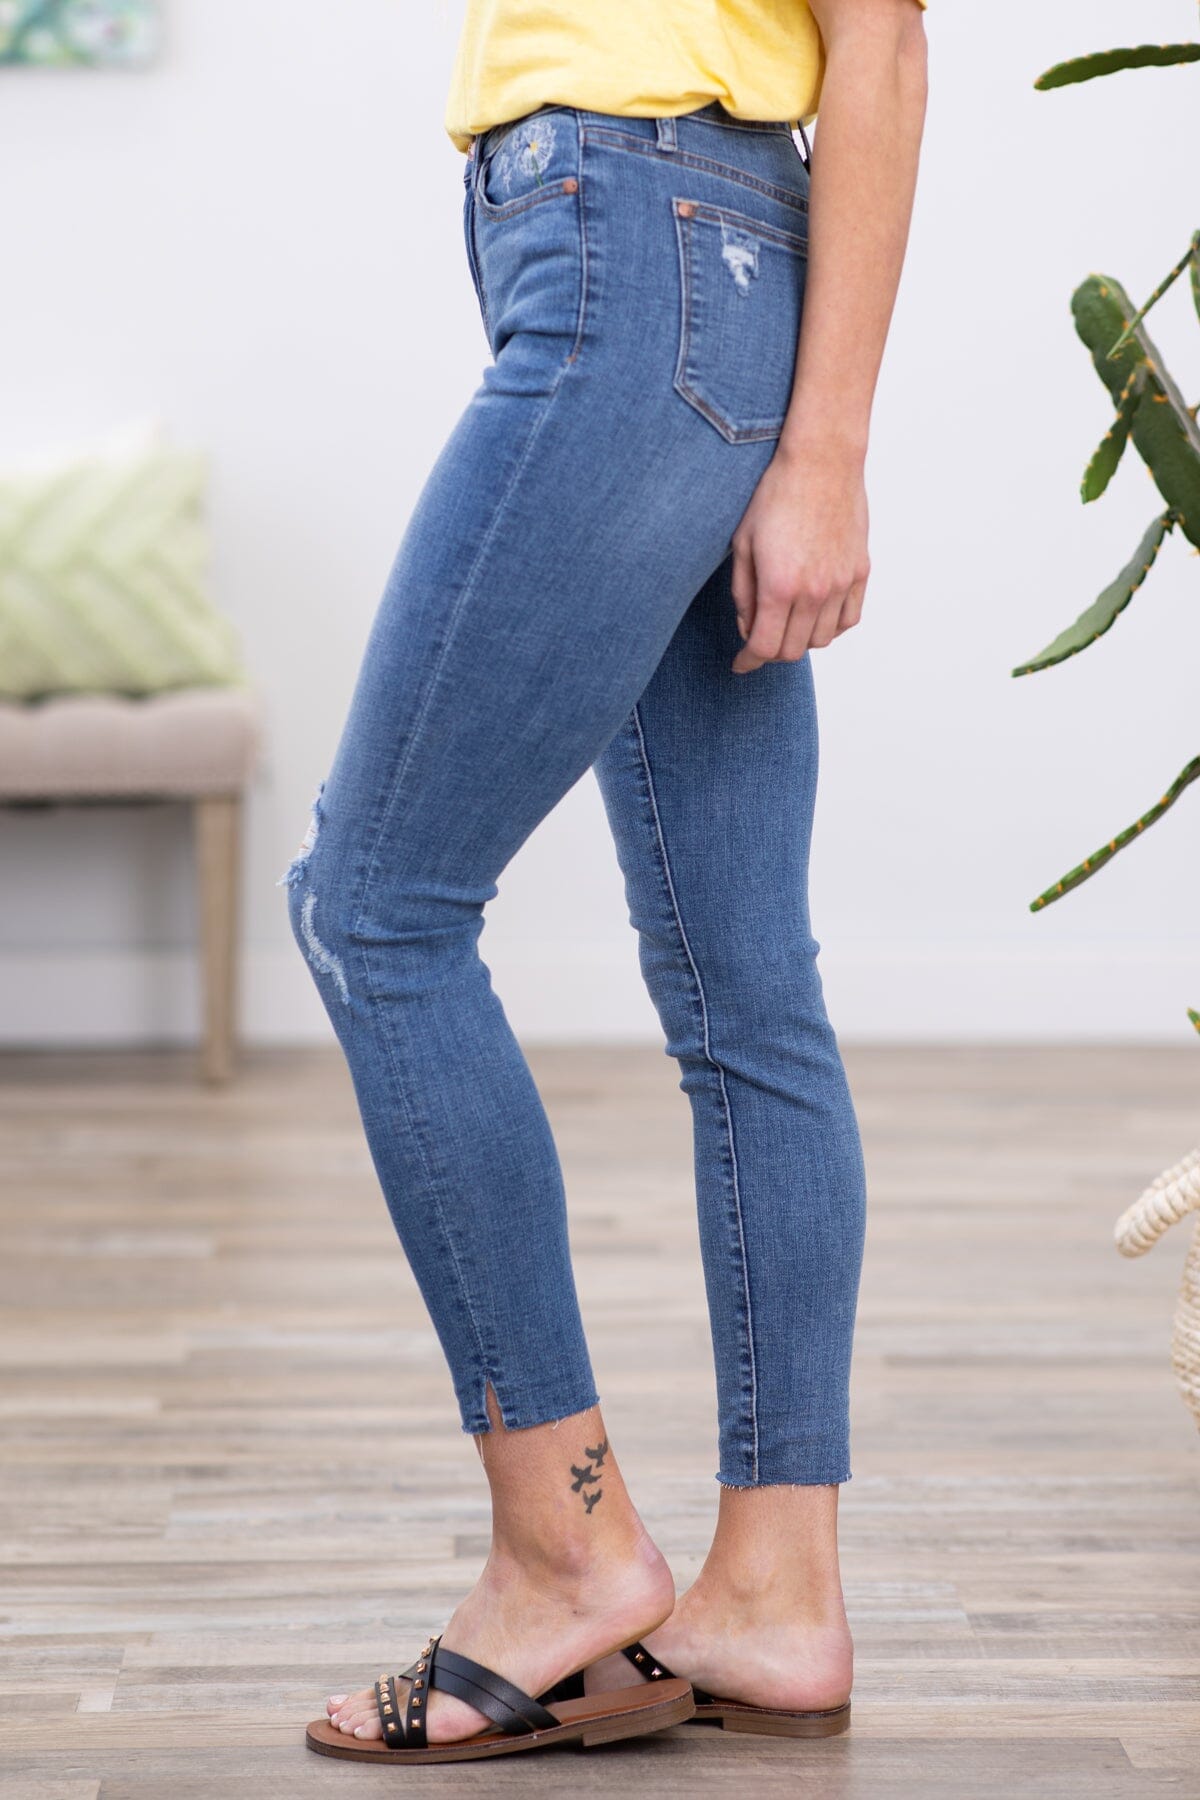 Judy Blue Dandelion Embroidered Jeans - Filly Flair